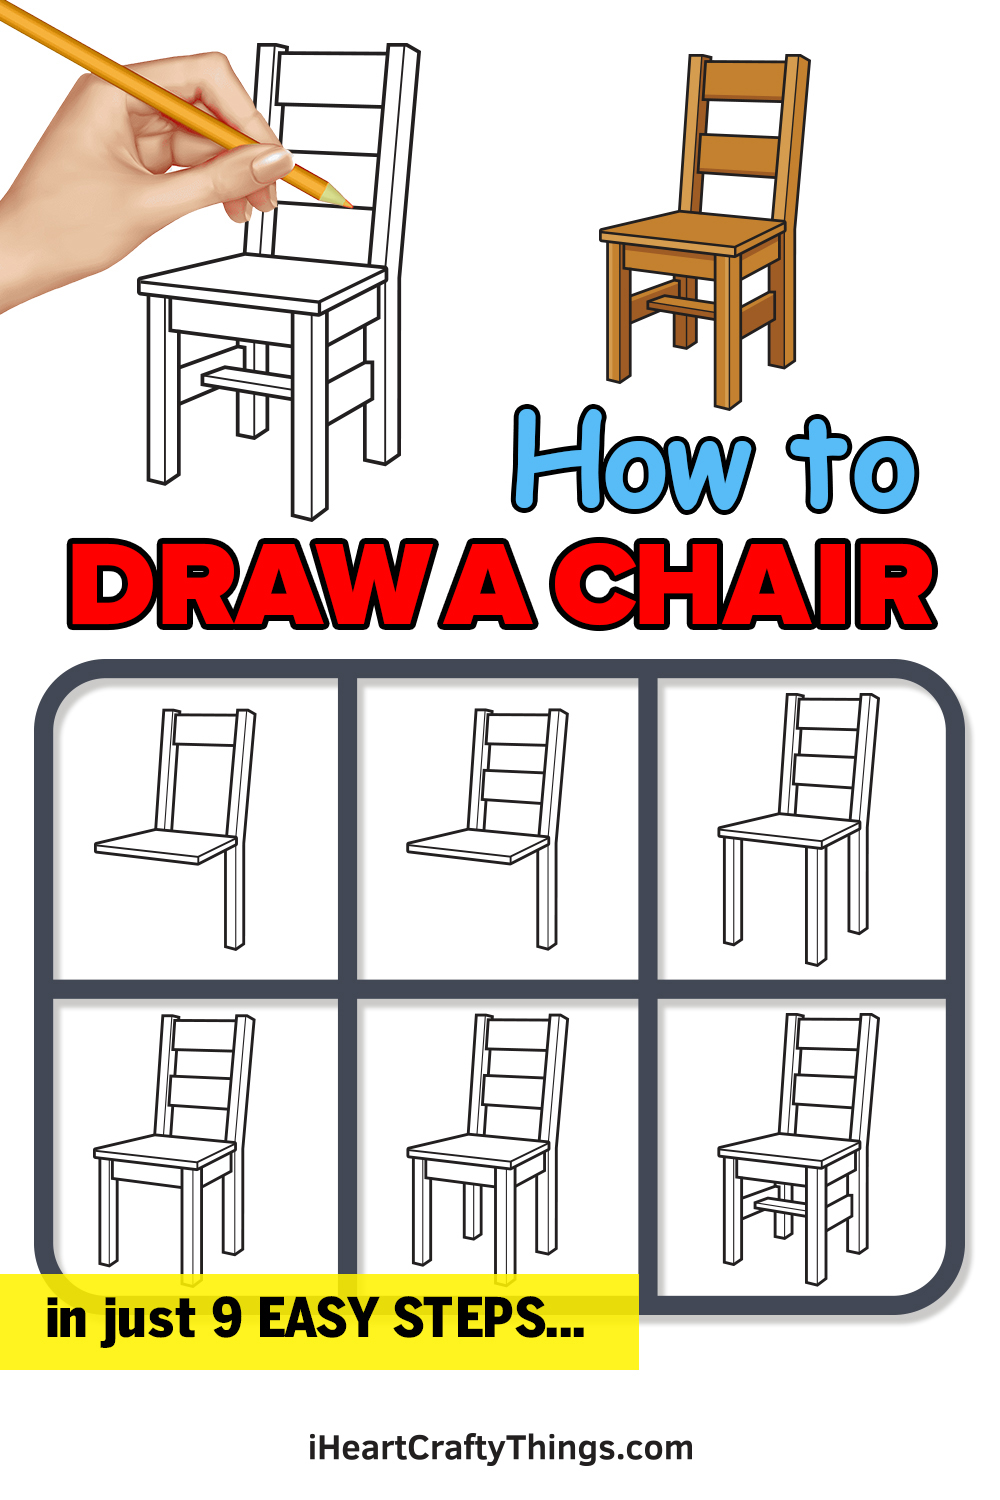 How to draw a chair in 9 easy steps